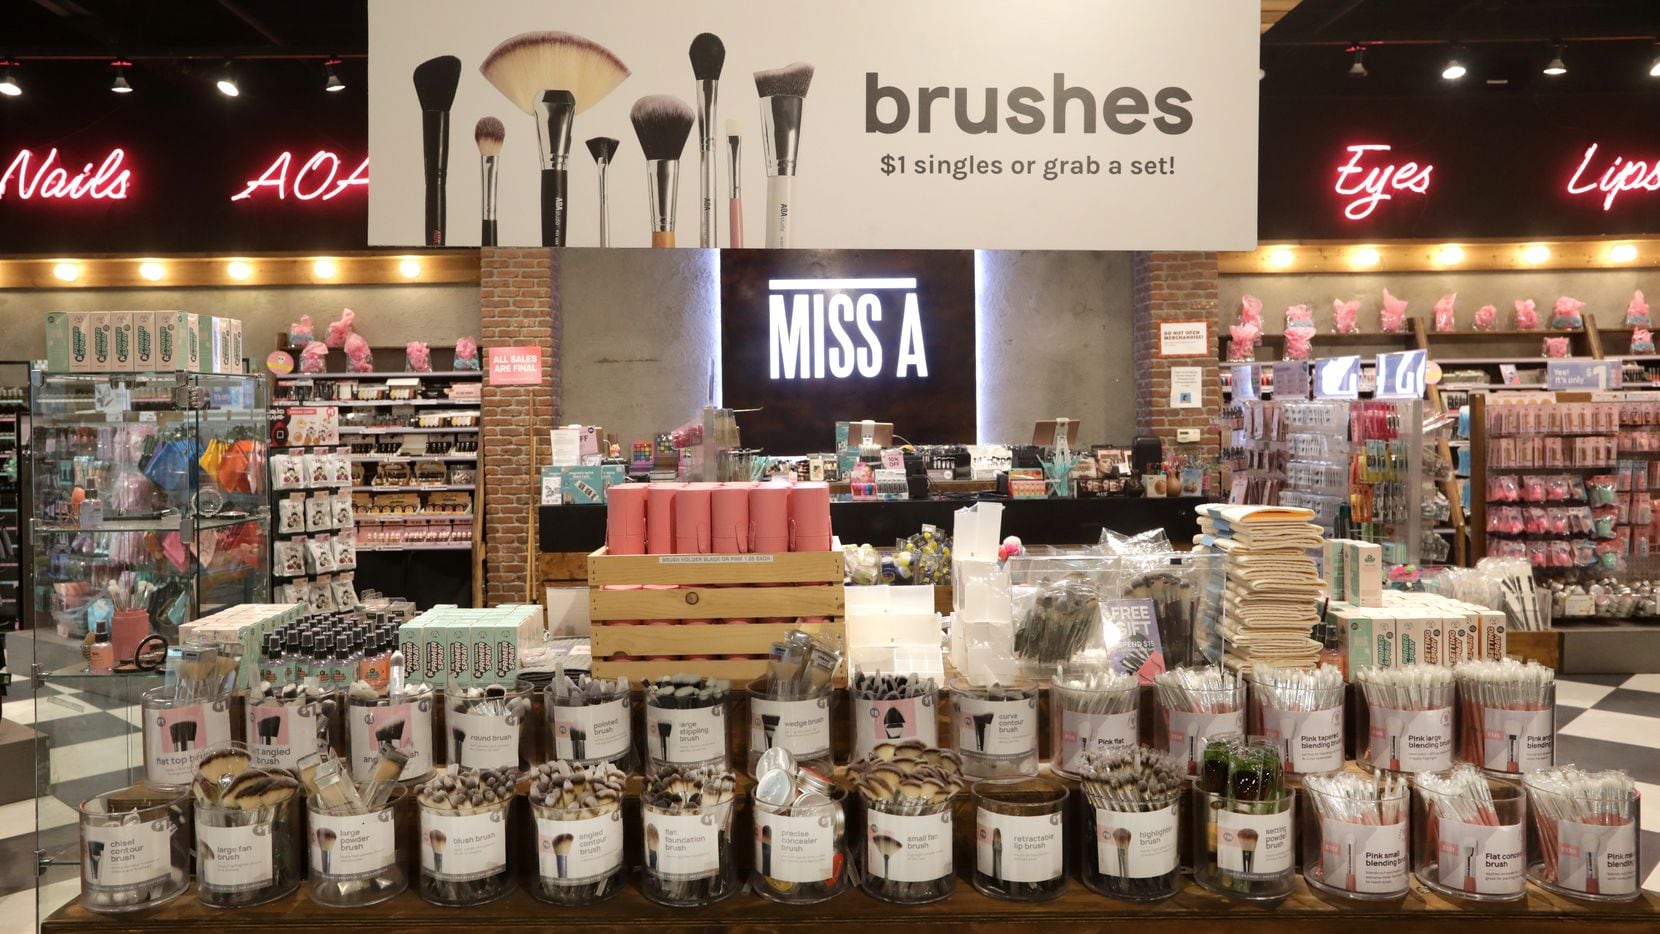 Products from the Dallas-based $1 beauty retailer Miss A are displayed in the retailer's...